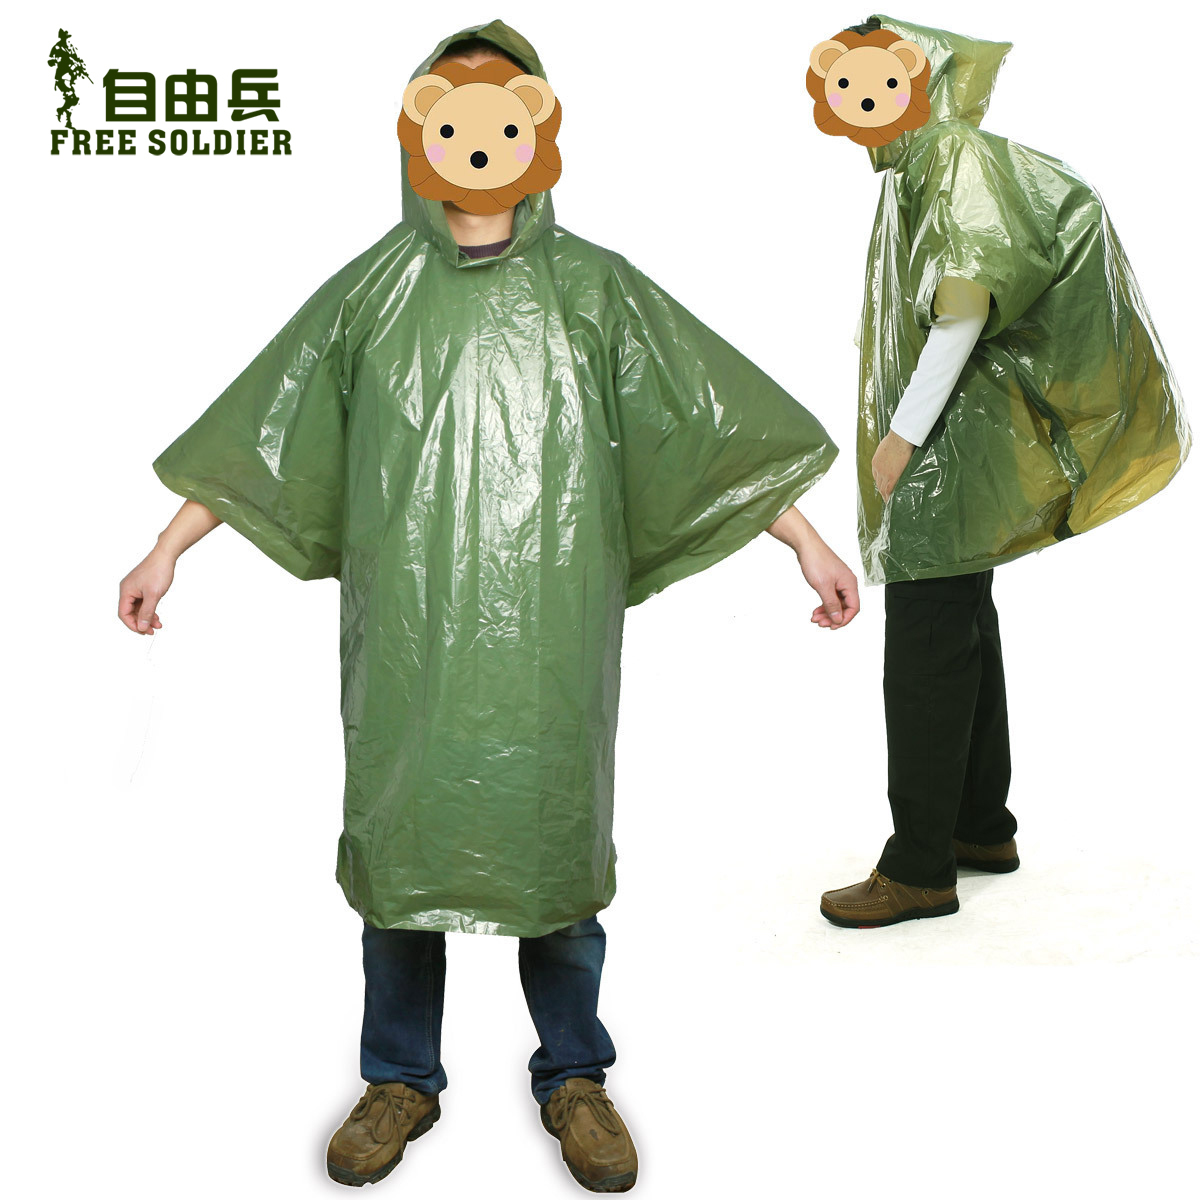 Outdoor portable raincoat thickening Burberry poncho backpack poncho rainproof travel raincoat